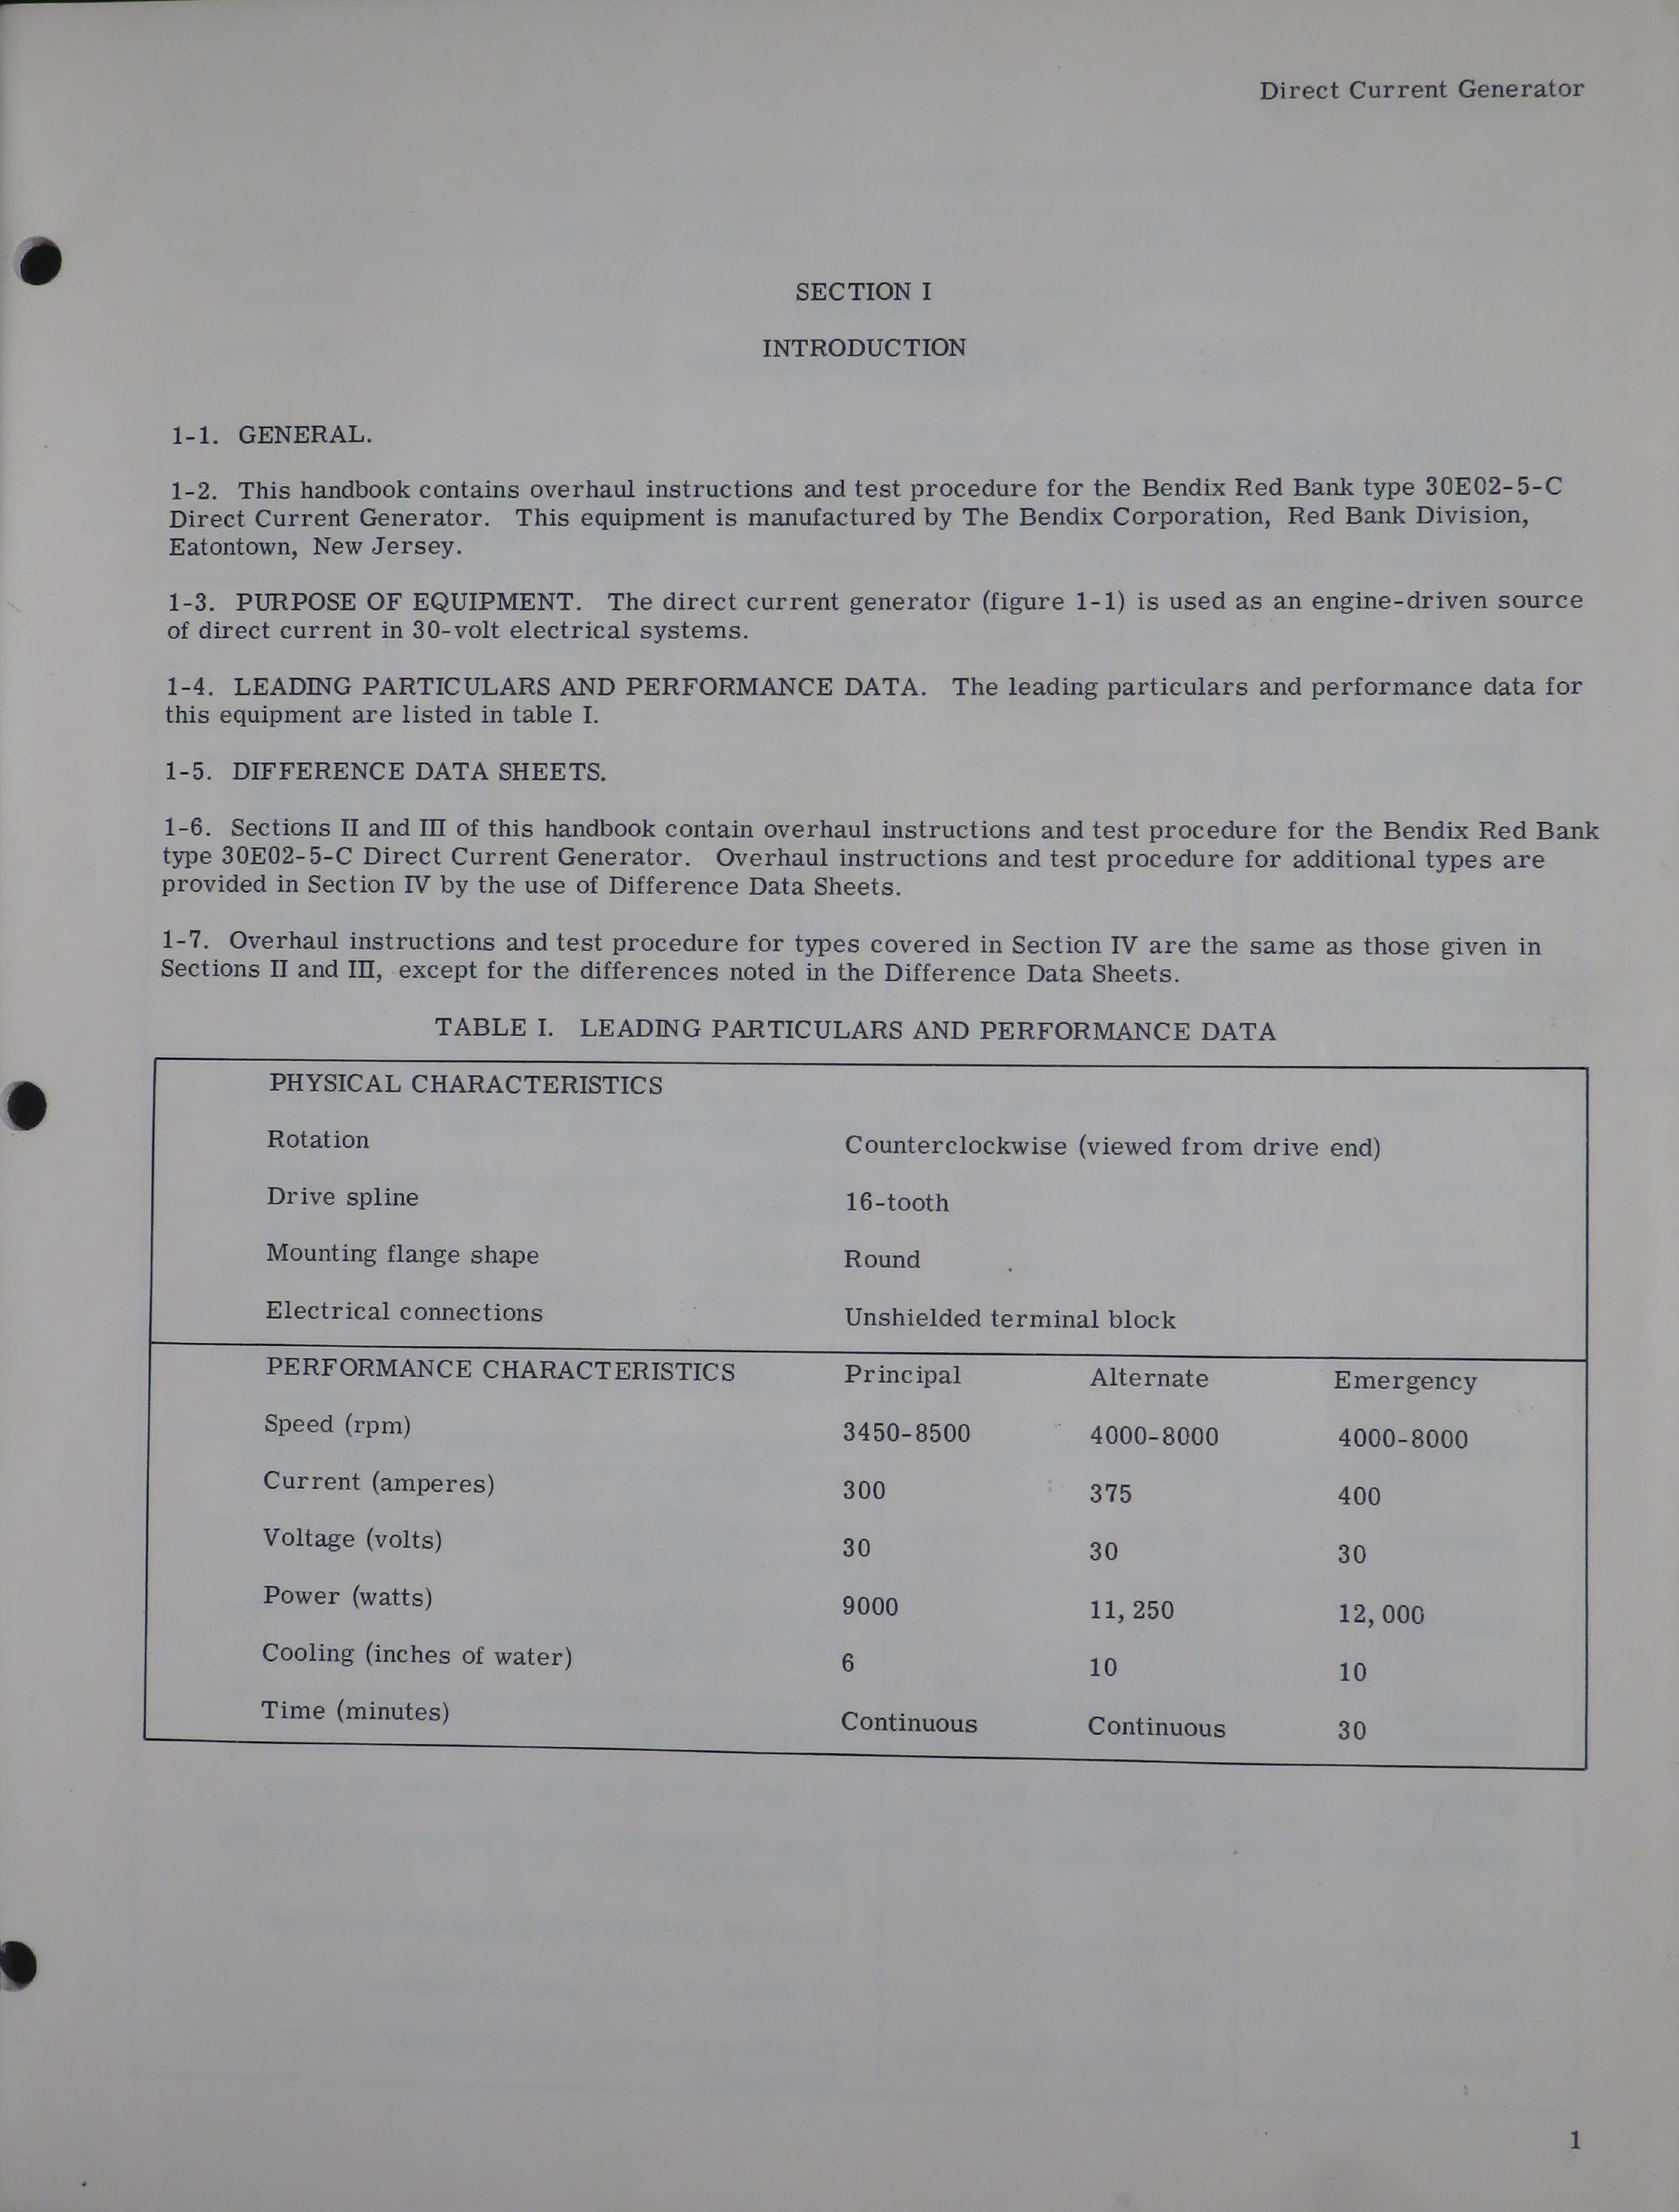 Sample page 5 from AirCorps Library document: Overhaul Instructions for Direct Current Generators